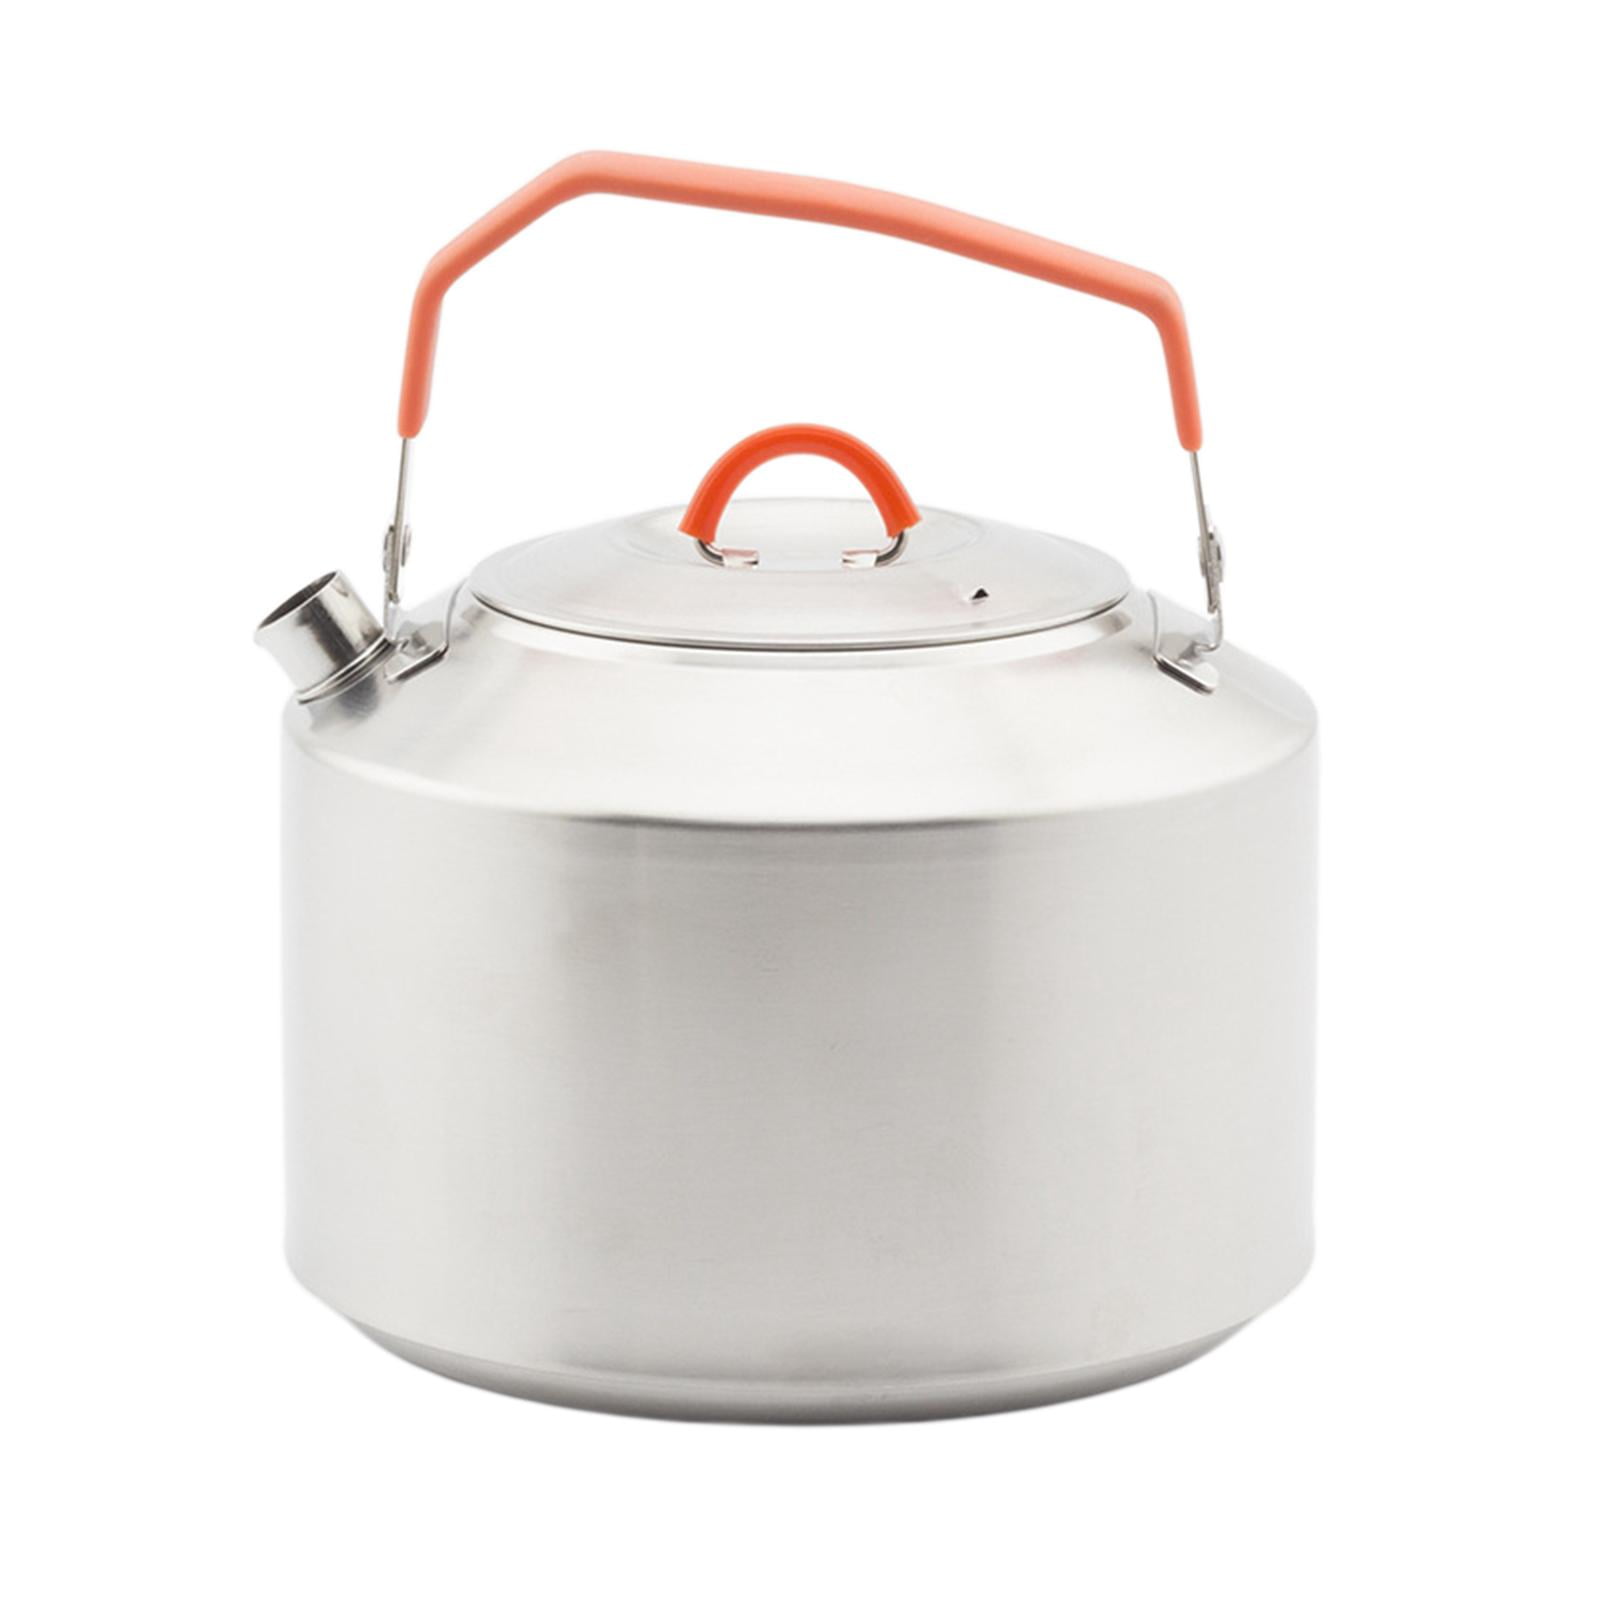 Outdoor Camping Kettle Lightweight Works with Campfires 1.5-Liter